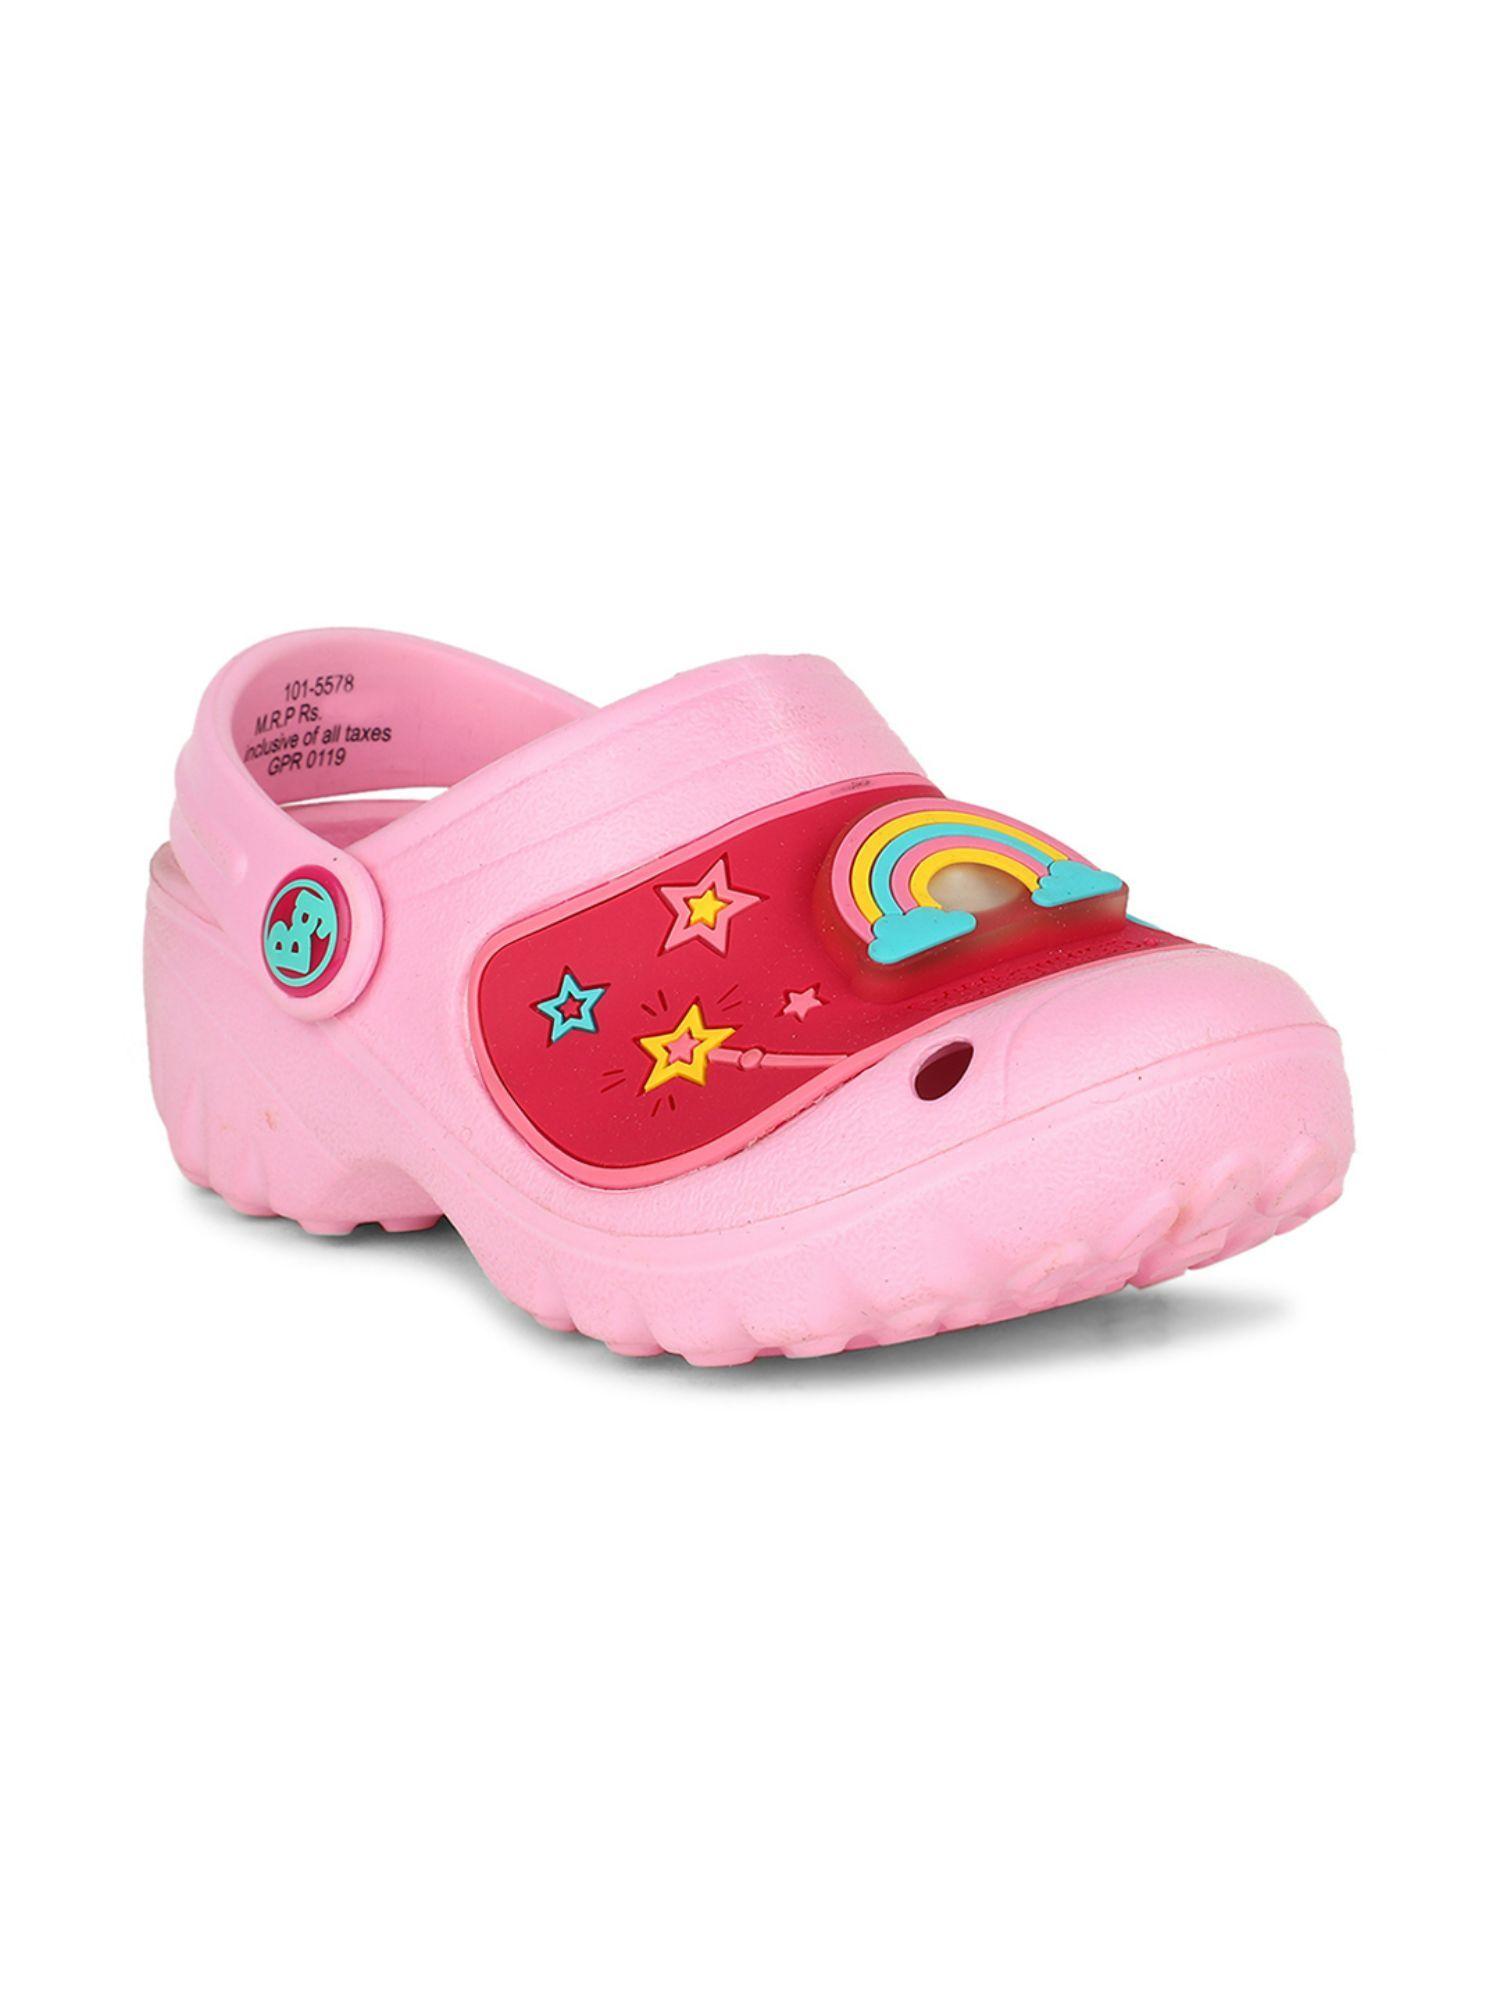 solid pink clogs